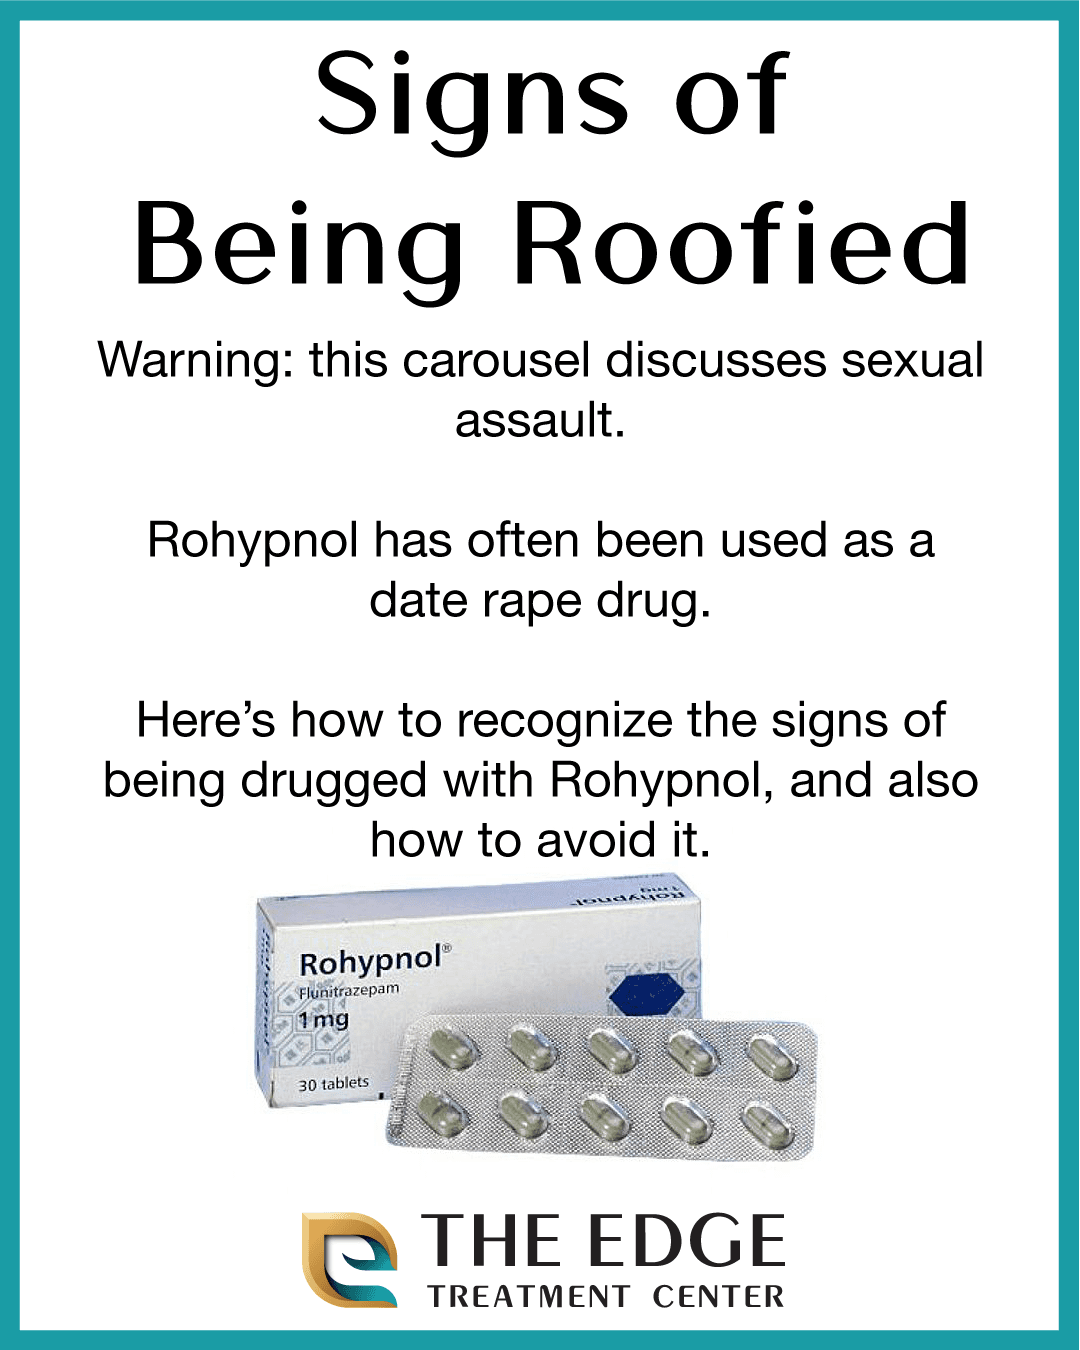 Symptoms of Being Roofied